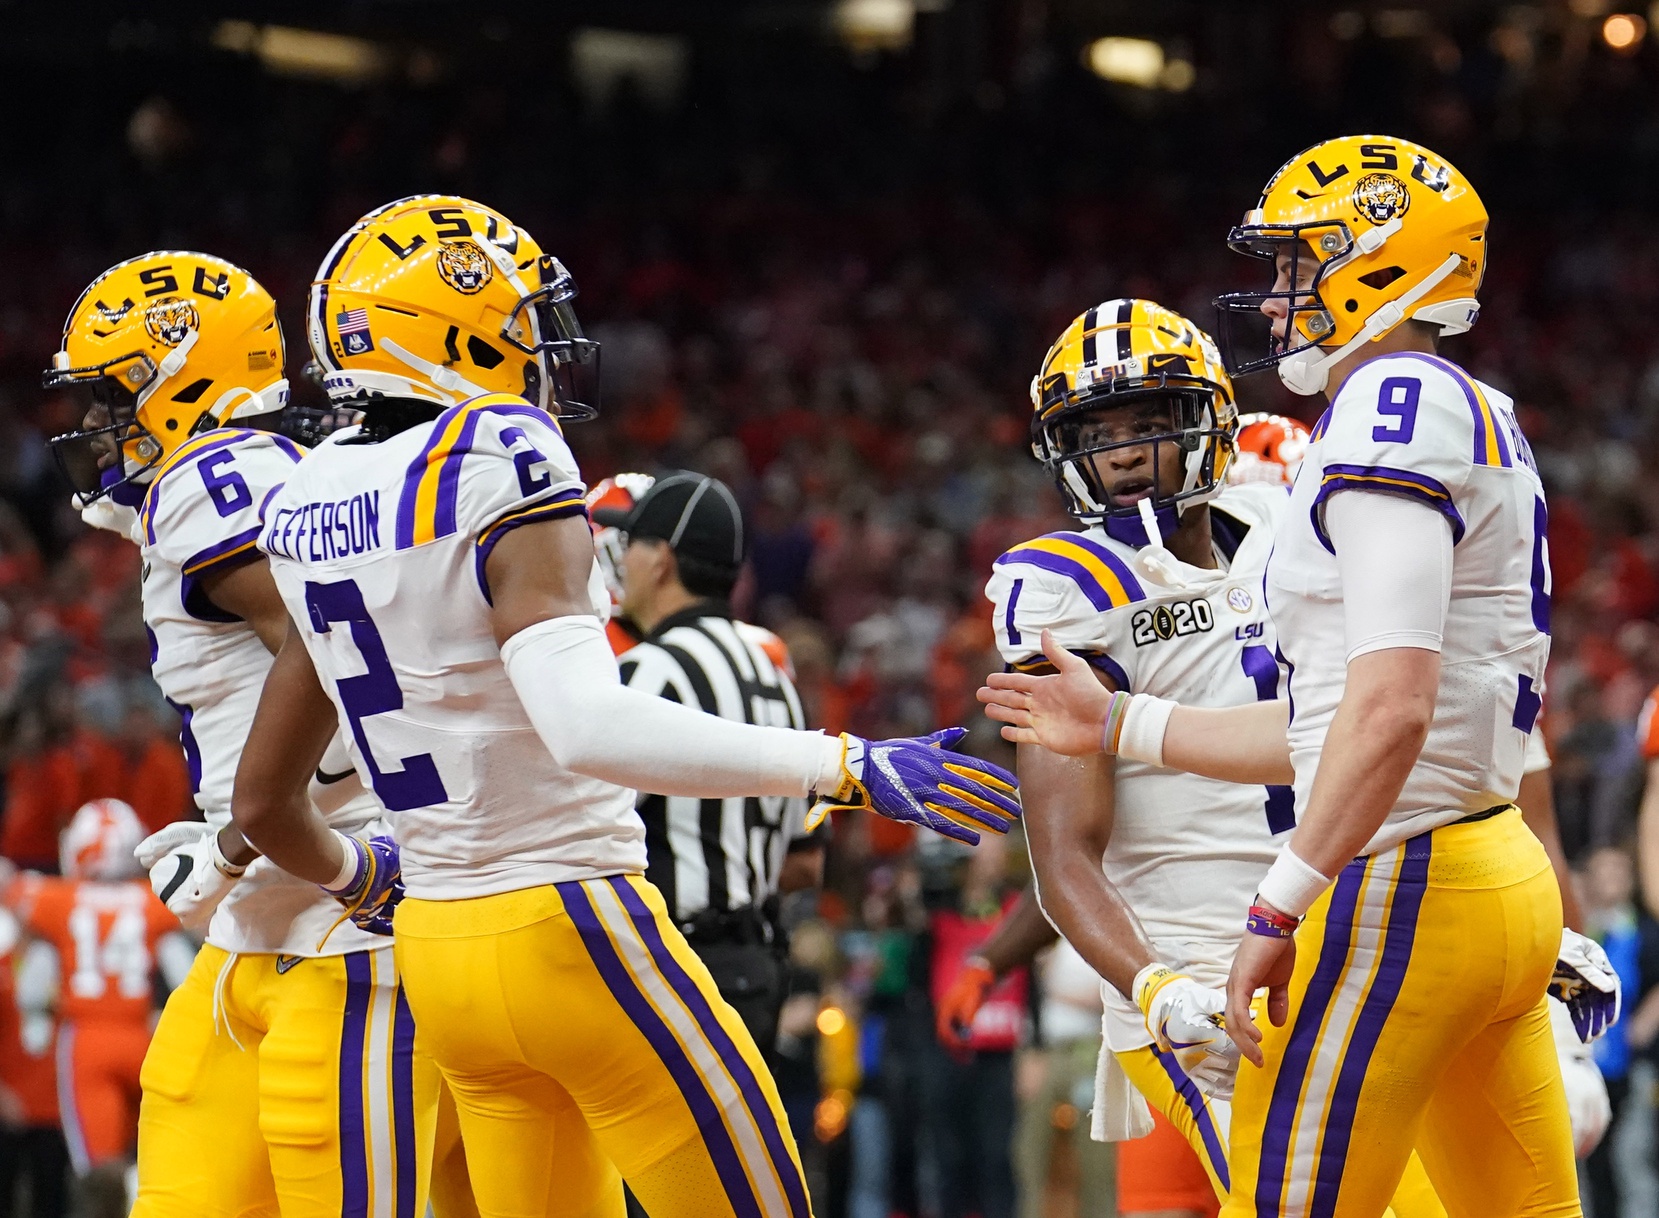 Biggest highlights from LSU's win over Clemson in CFP National